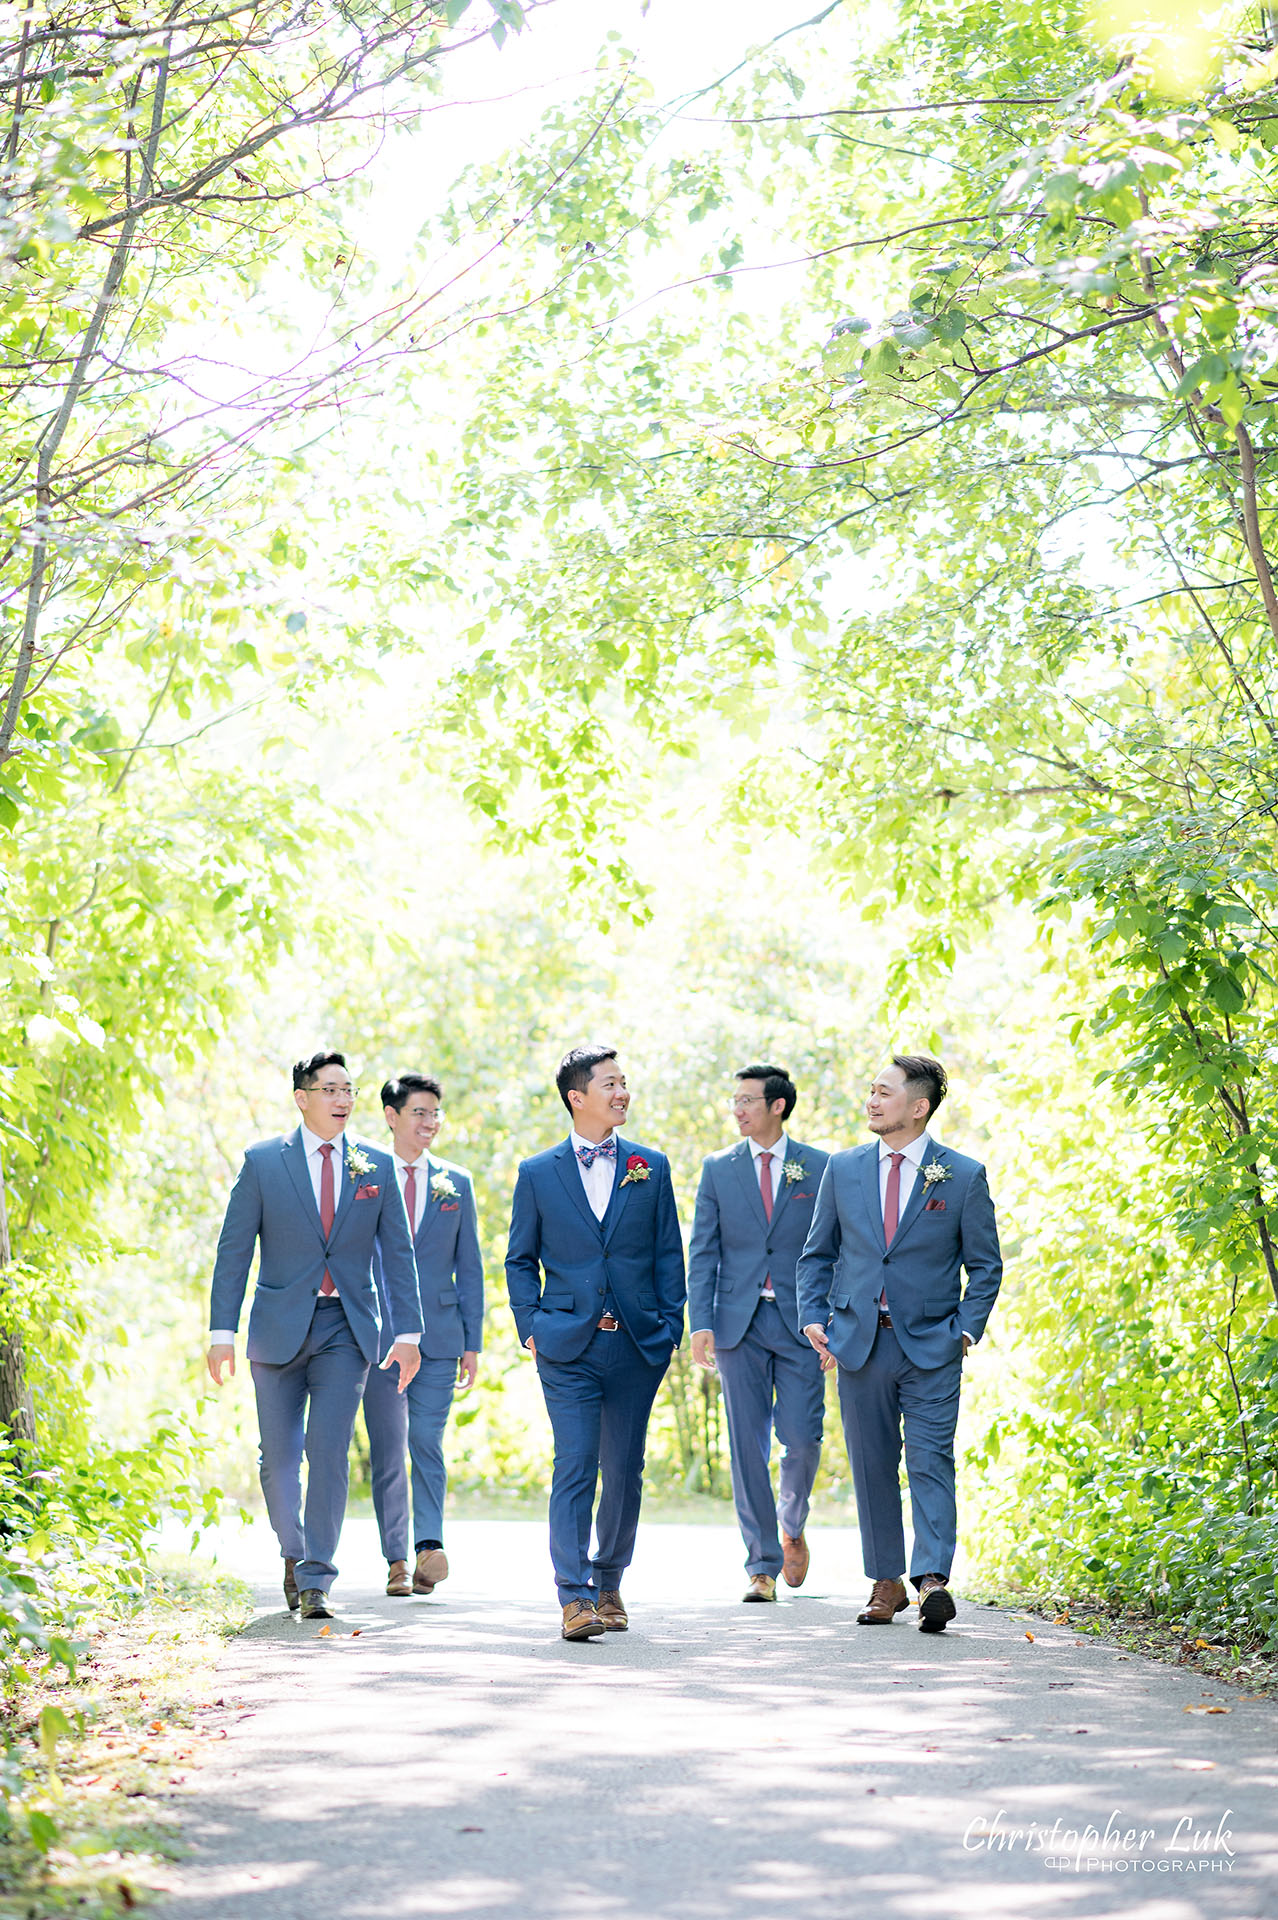 Christopher Luk Toronto Wedding Photographer Bridle Trail Baptist Church Unionville Main Street Crystal Fountain Event Venue Bride Groom Natural Photojournalistic Candid Creative Portrait Session Pictures Forest Best Man Groomsmen Stylish Boy Band Walking Together